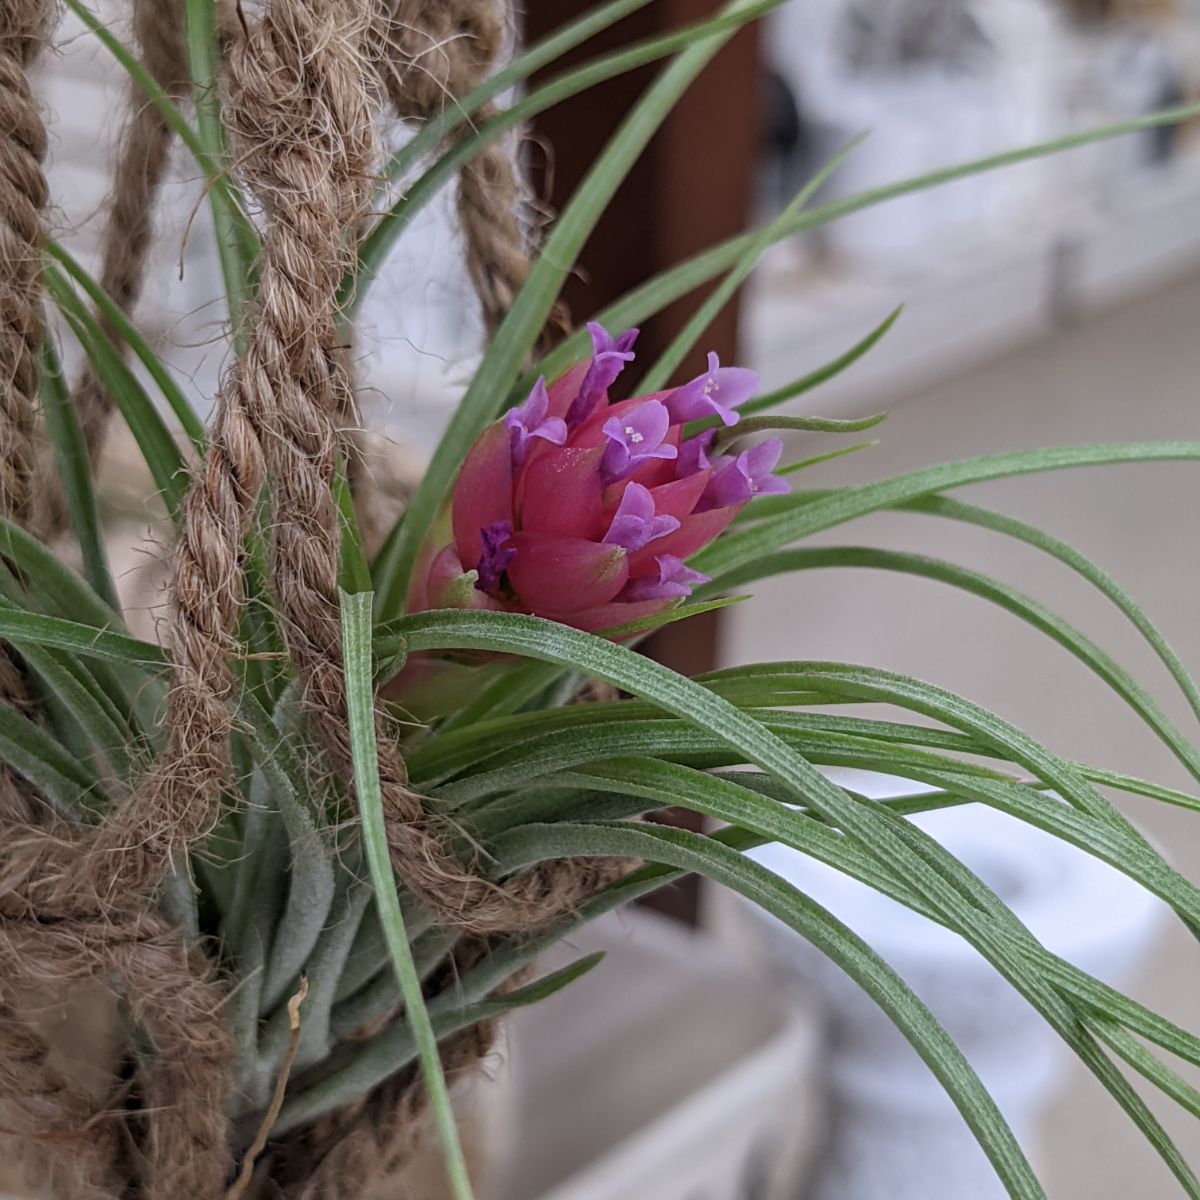 Blooming air plant with fuchsia flower in a Bohemian jute twine plant hammock